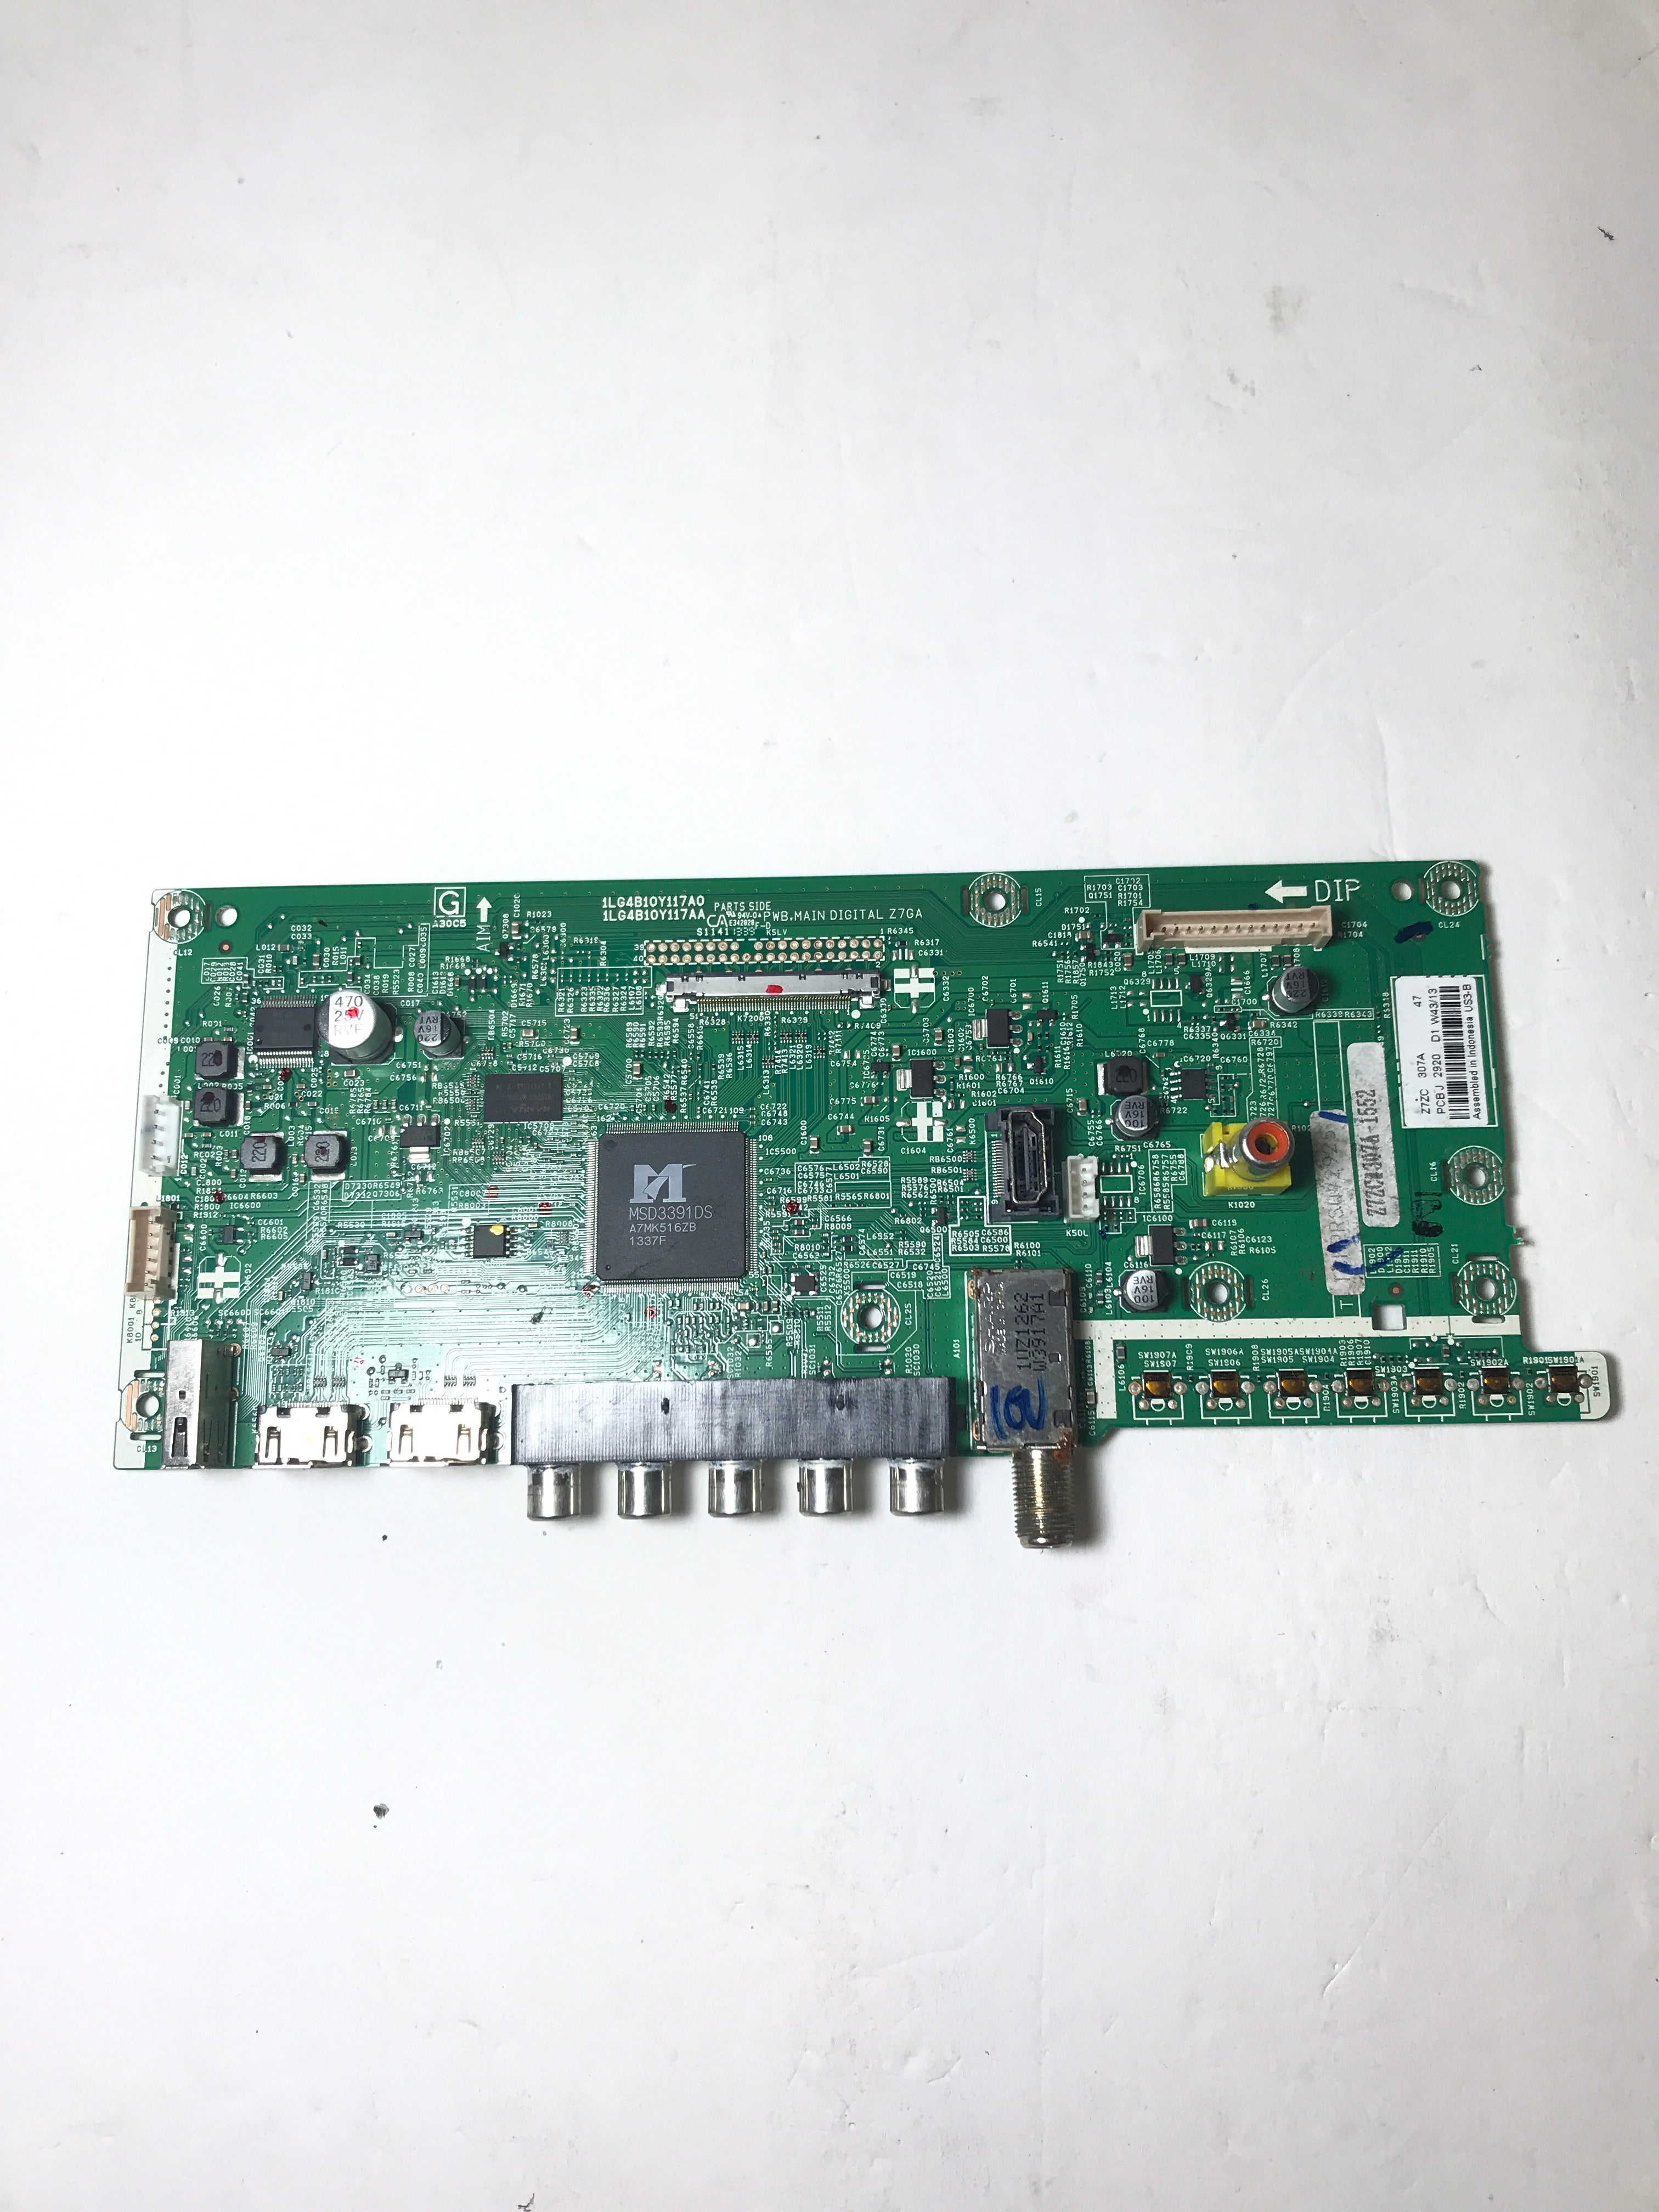 Sanyo 1LG4B10Y117A0 Z7ZC Main Board for DP39E23 (P39E23-01/P39E23-02 Chassis)